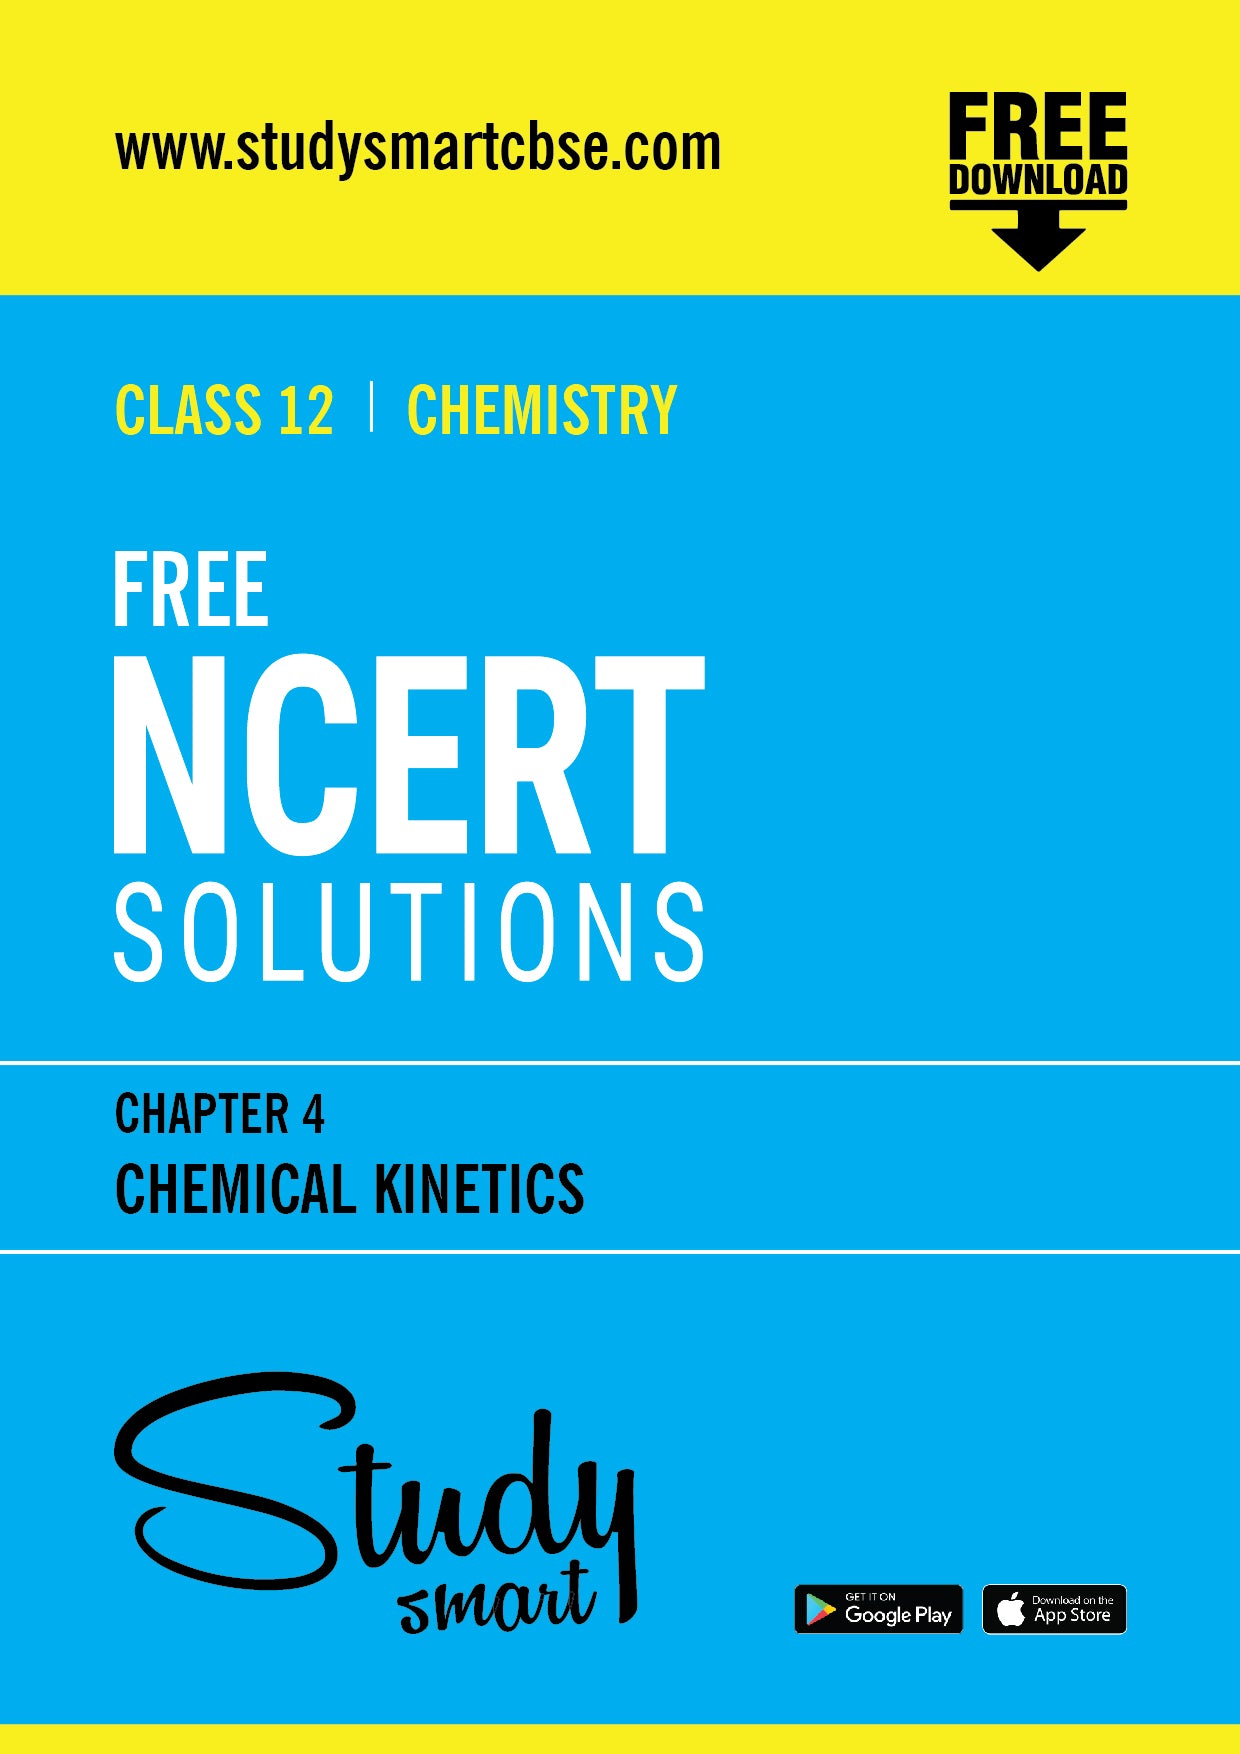 Free NCERT Solutions Class 12th Chemistry Chapter 4 Chemical Kinetics |  STUDY SMART CBSE